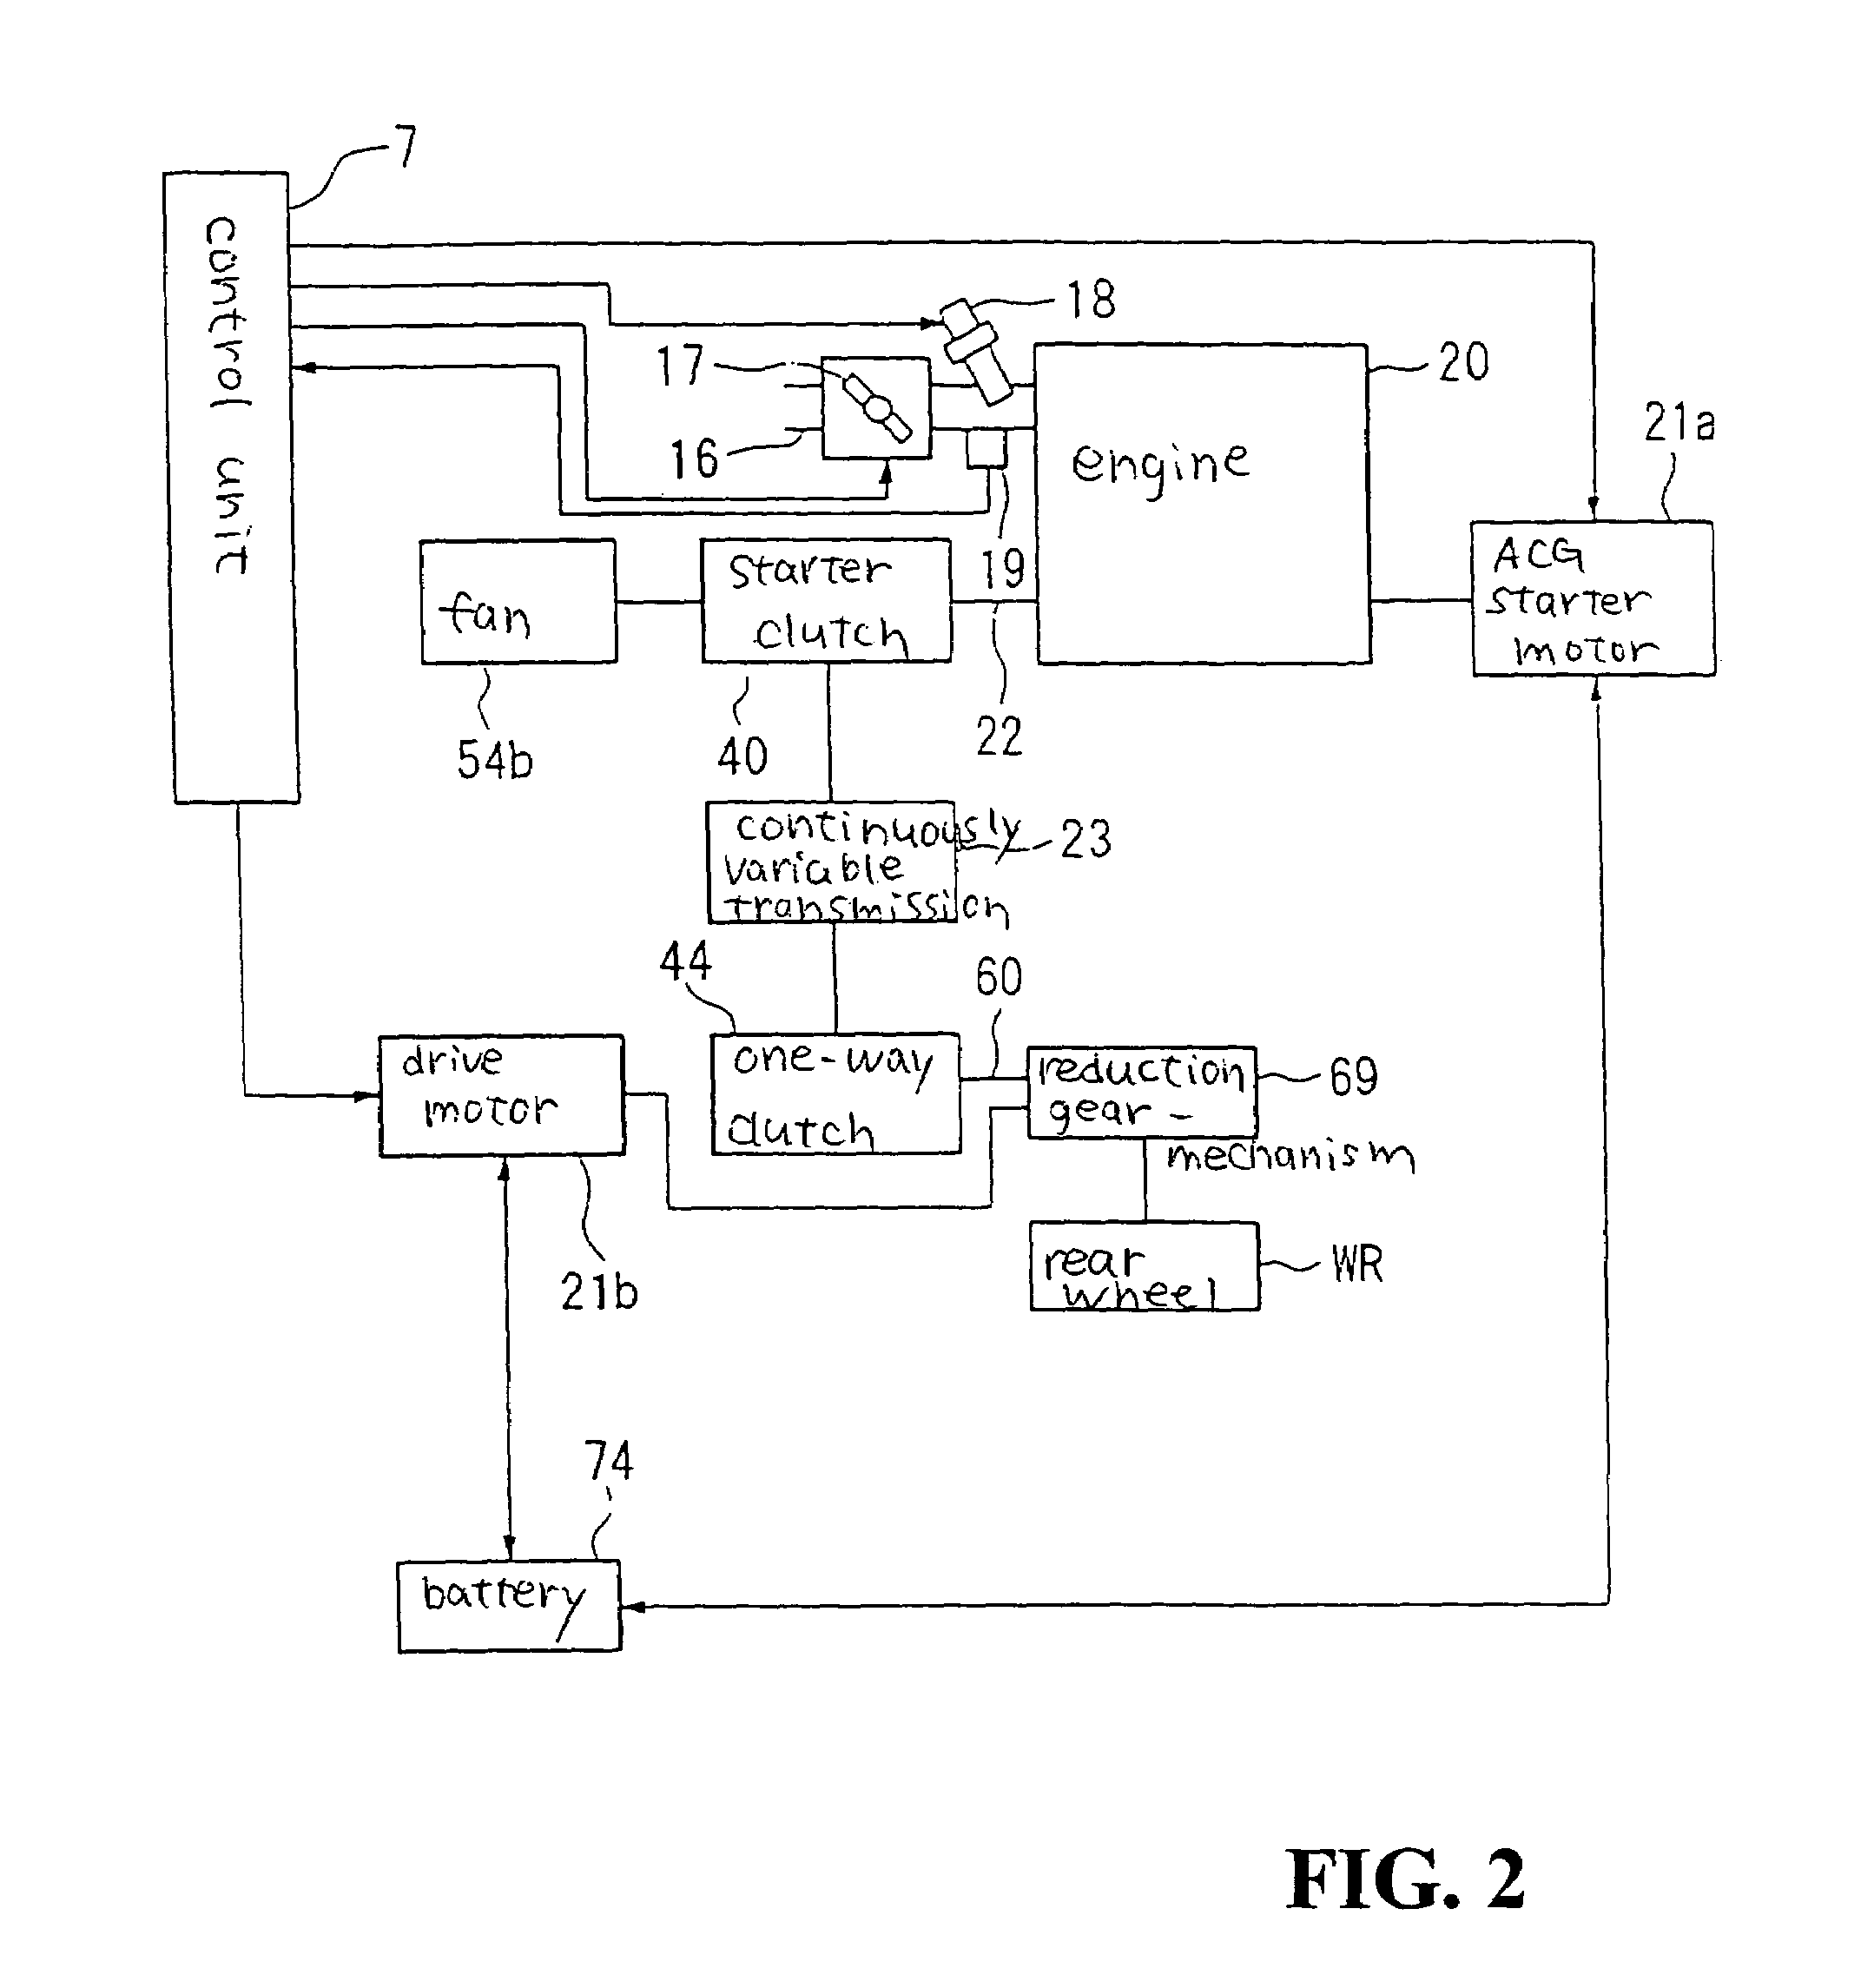 Power unit structure for hybrid vehicle